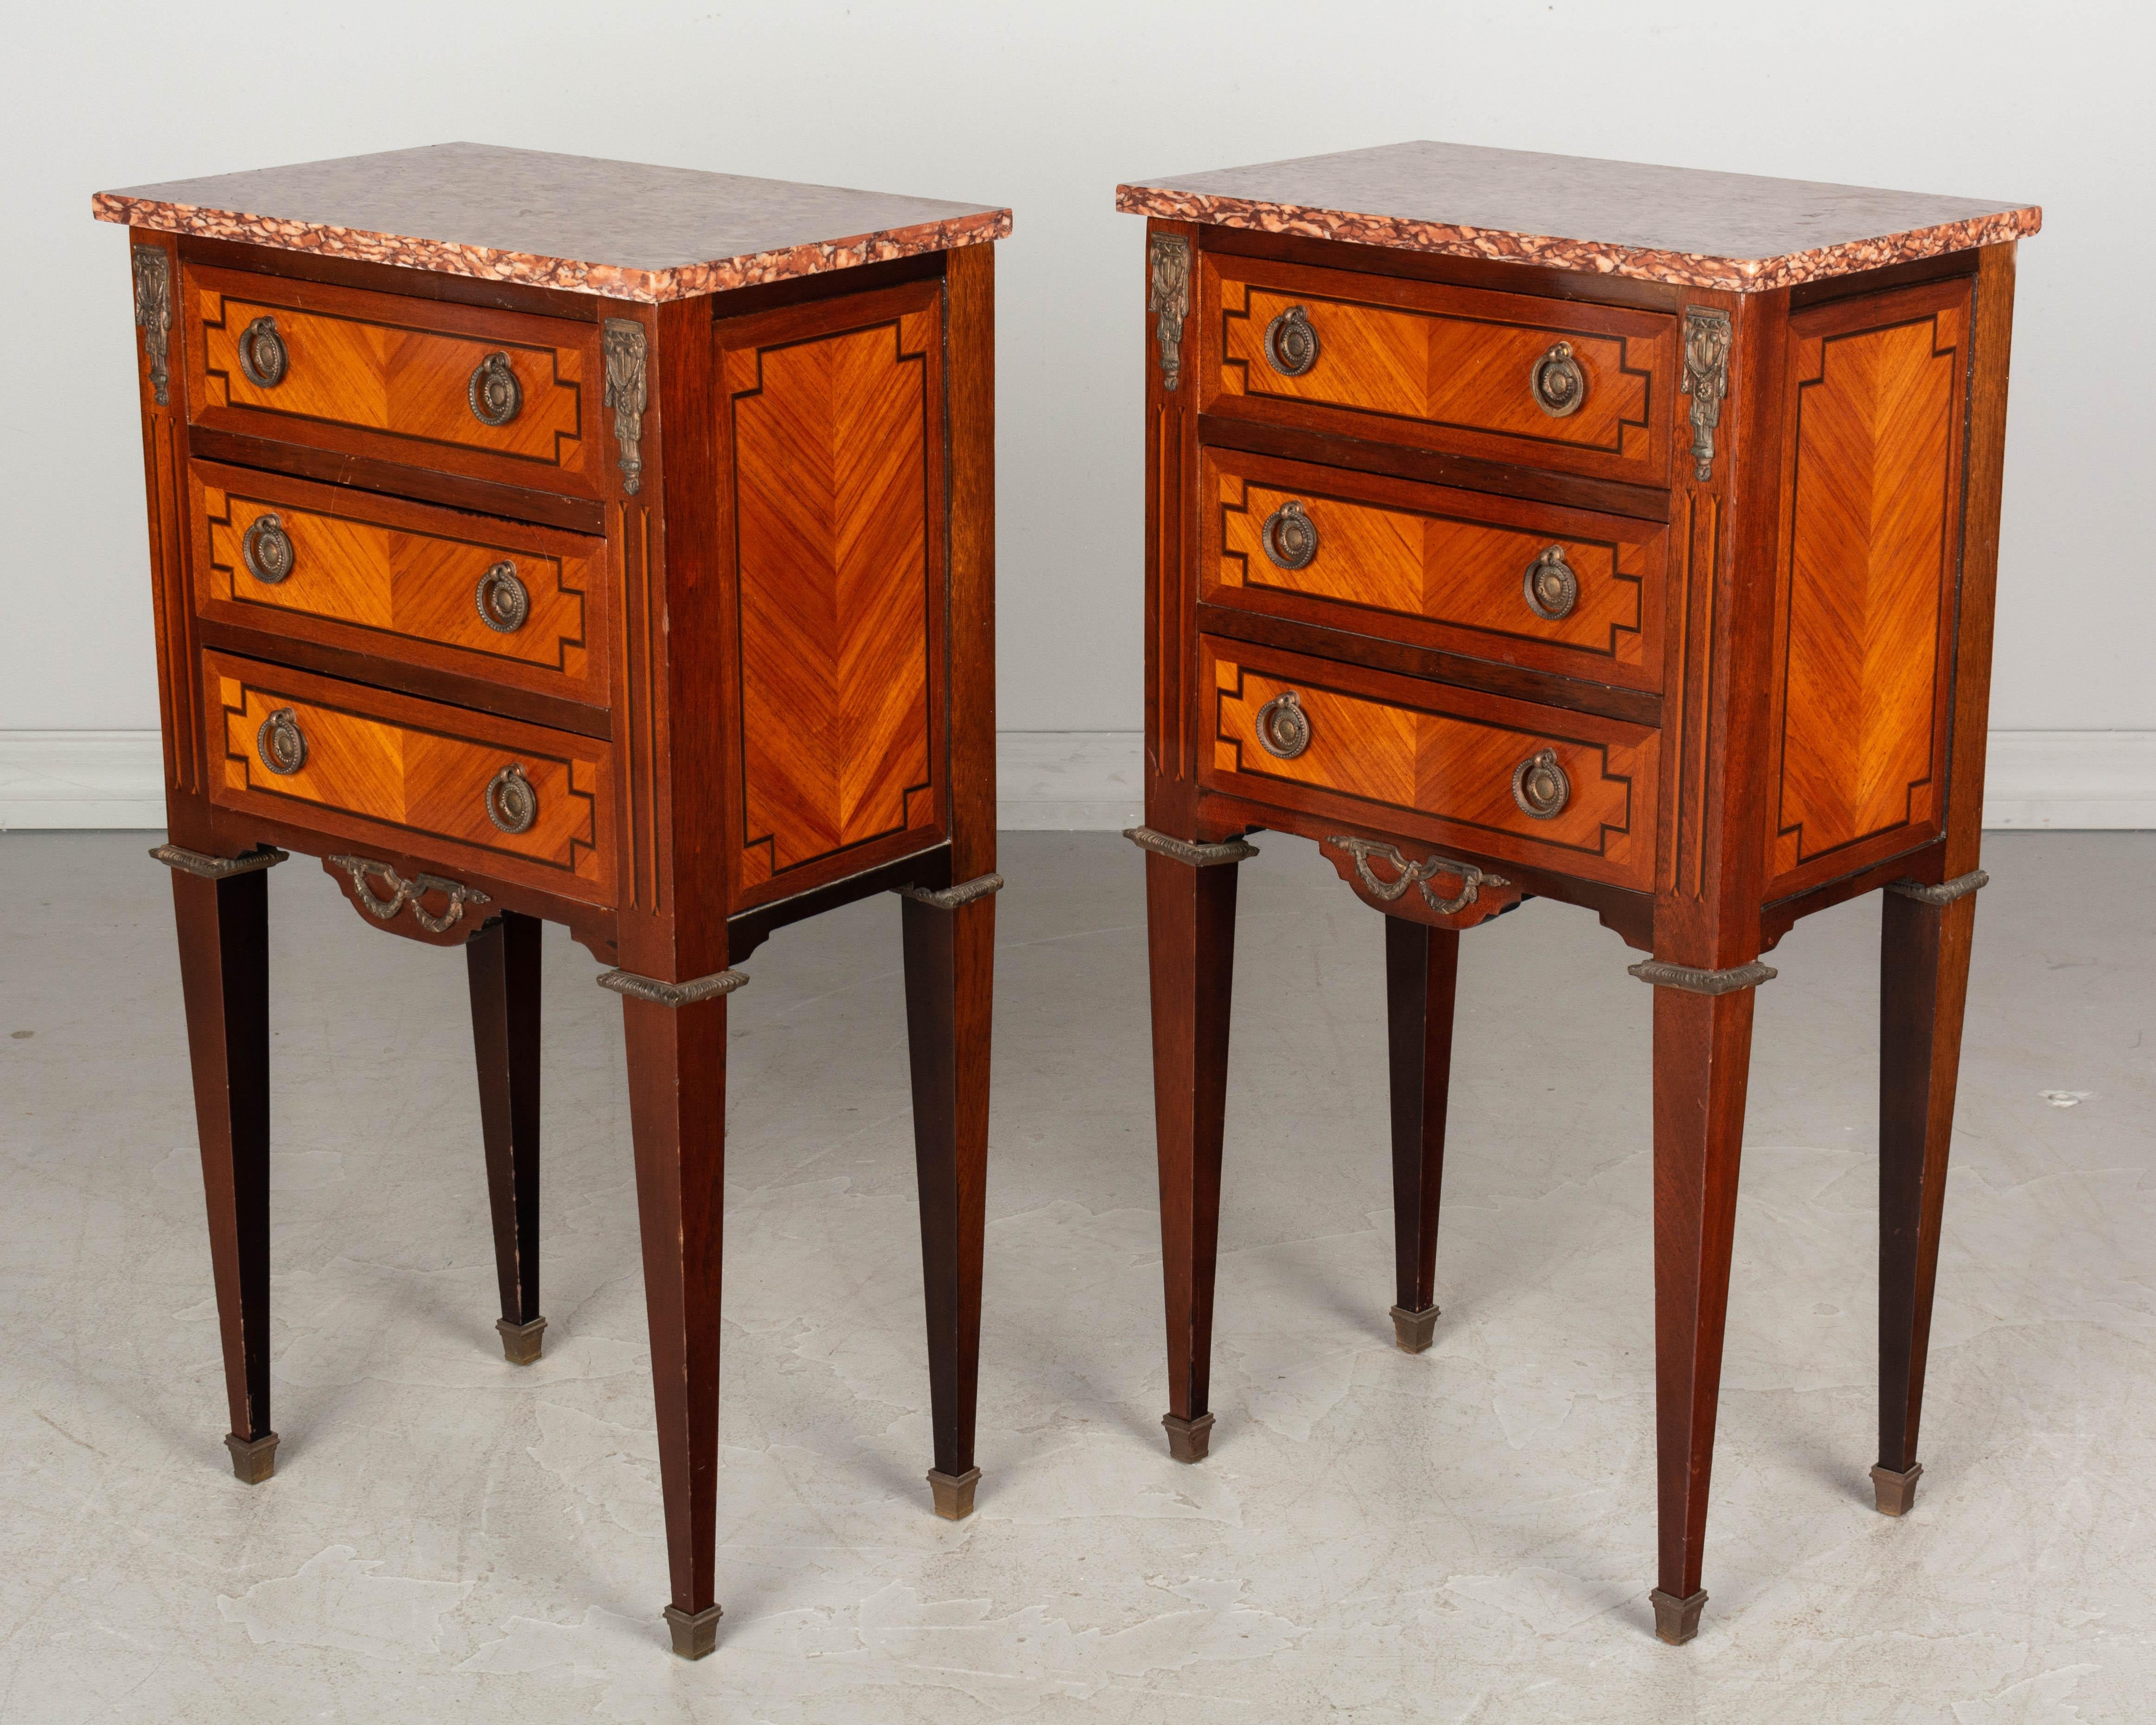 A pair of Louis XVI style French marquetry side tables, or nightstands. Inlaid veneers of mahogany and walnut with cast brass decoration. Three dovetailed drawers with ring pulls. Marble tops are not attached.